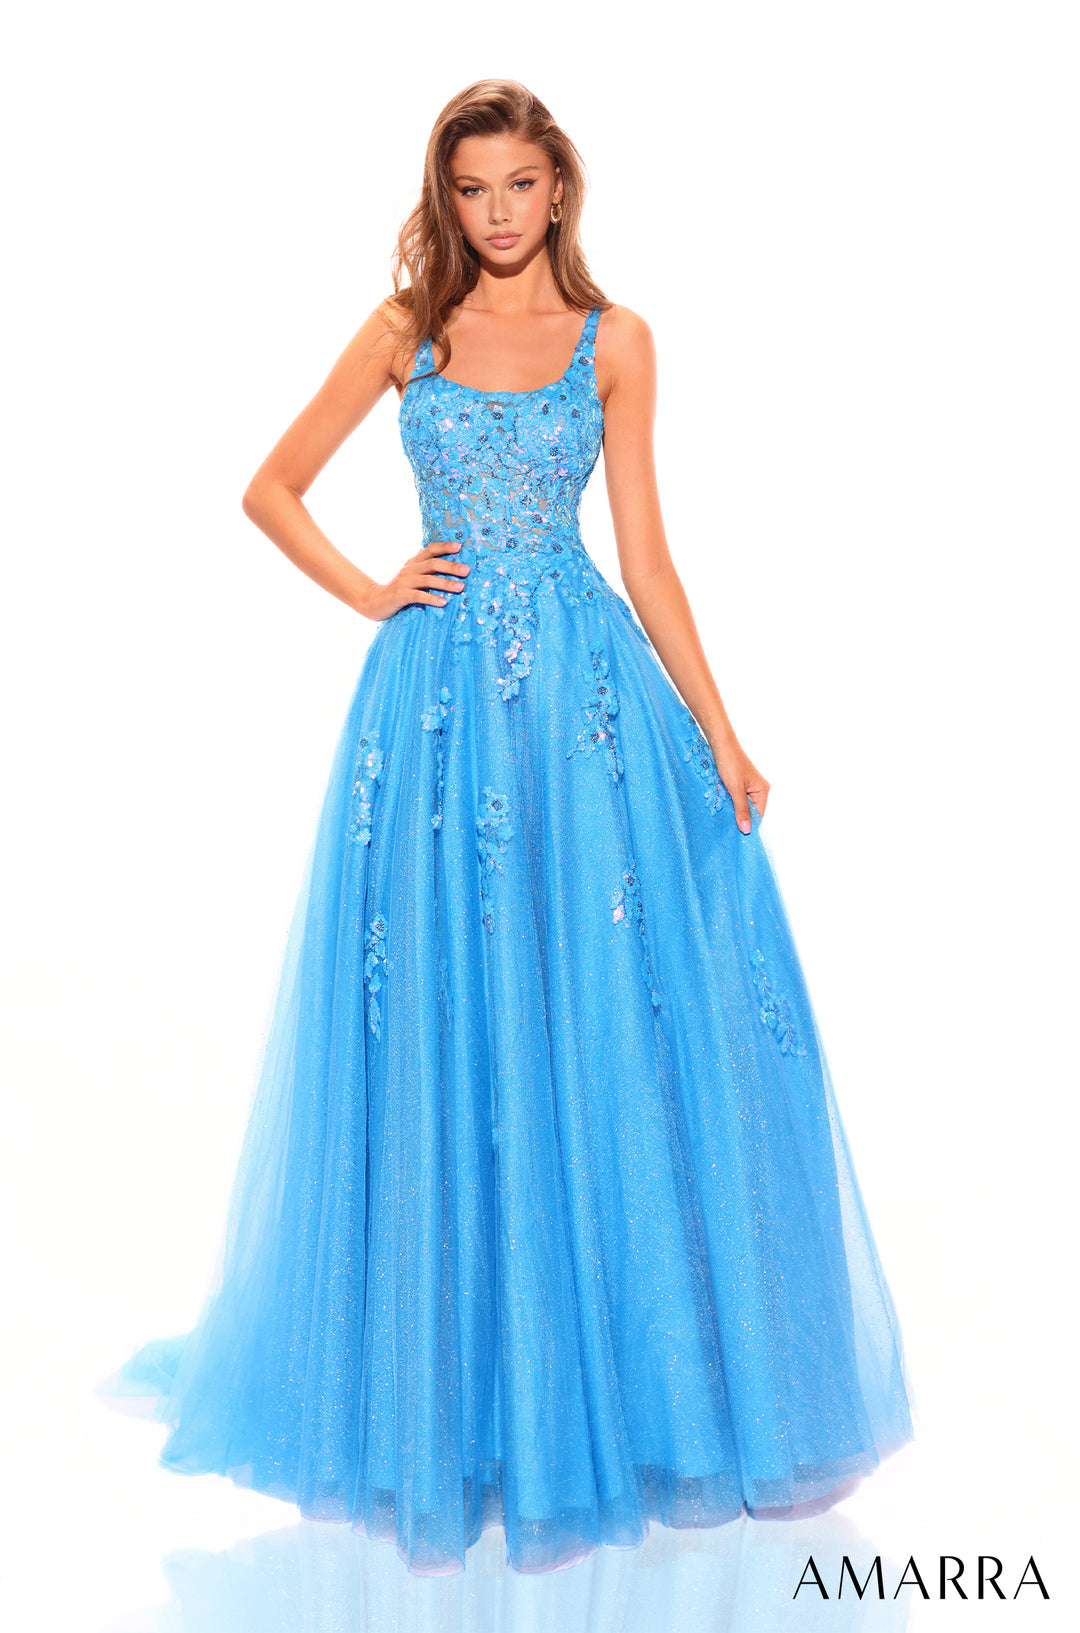 Sequin Applique Sleeveless Ball Gown by Amarra 88749